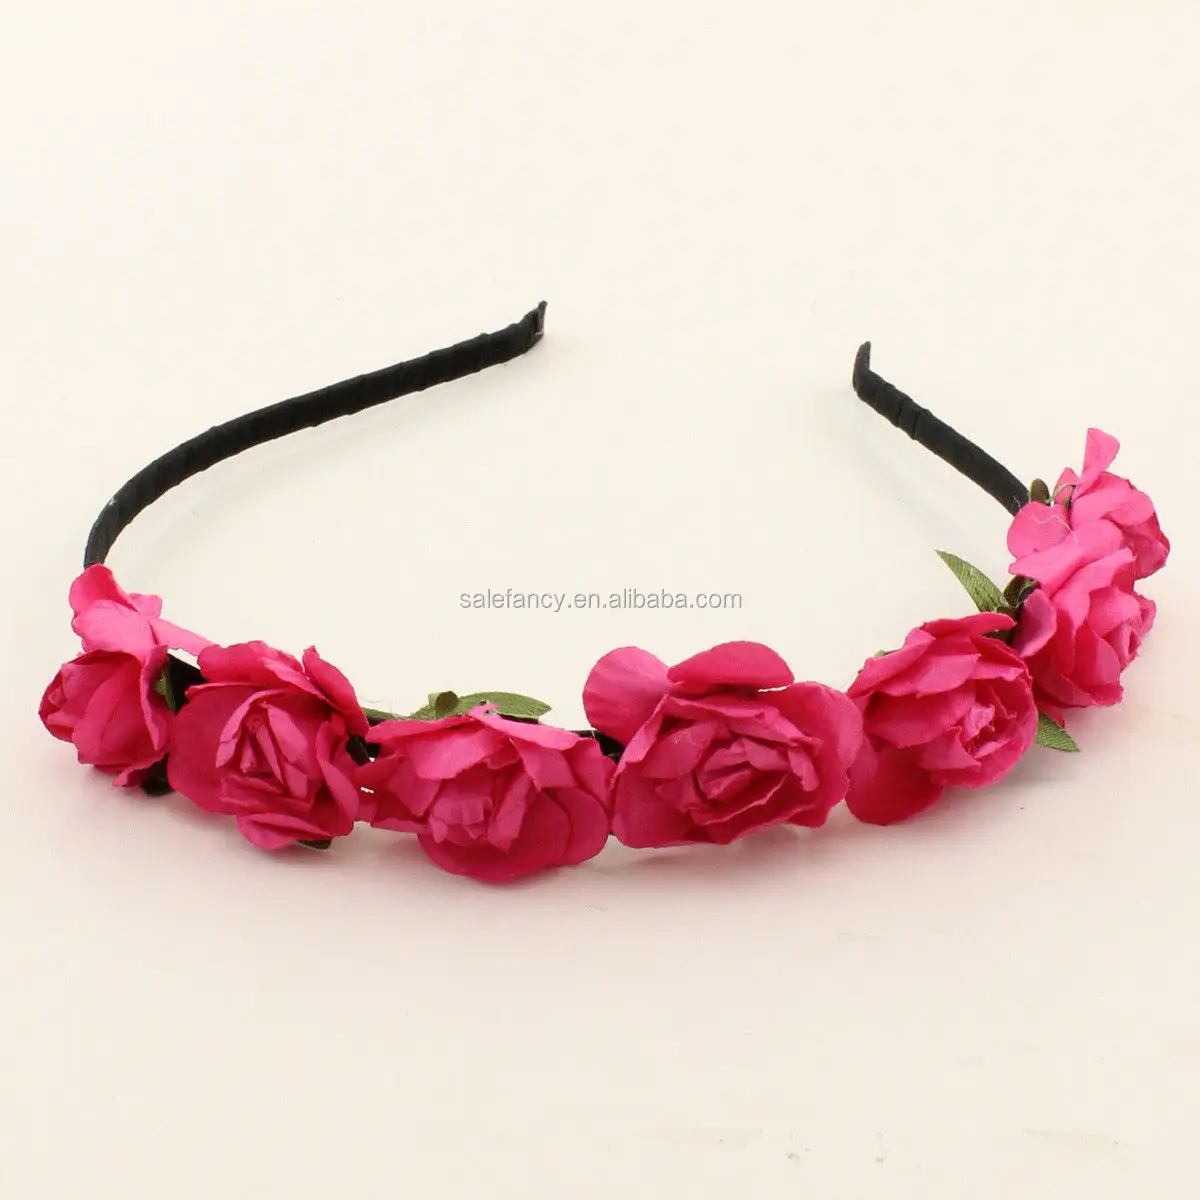 New Pick 2 Boho Flower Headbands Floral Crown Blue Pink Purple Red White Yellow Qfhd 1019 Buy Flower Headband Crownflower Headbandfloral Crown